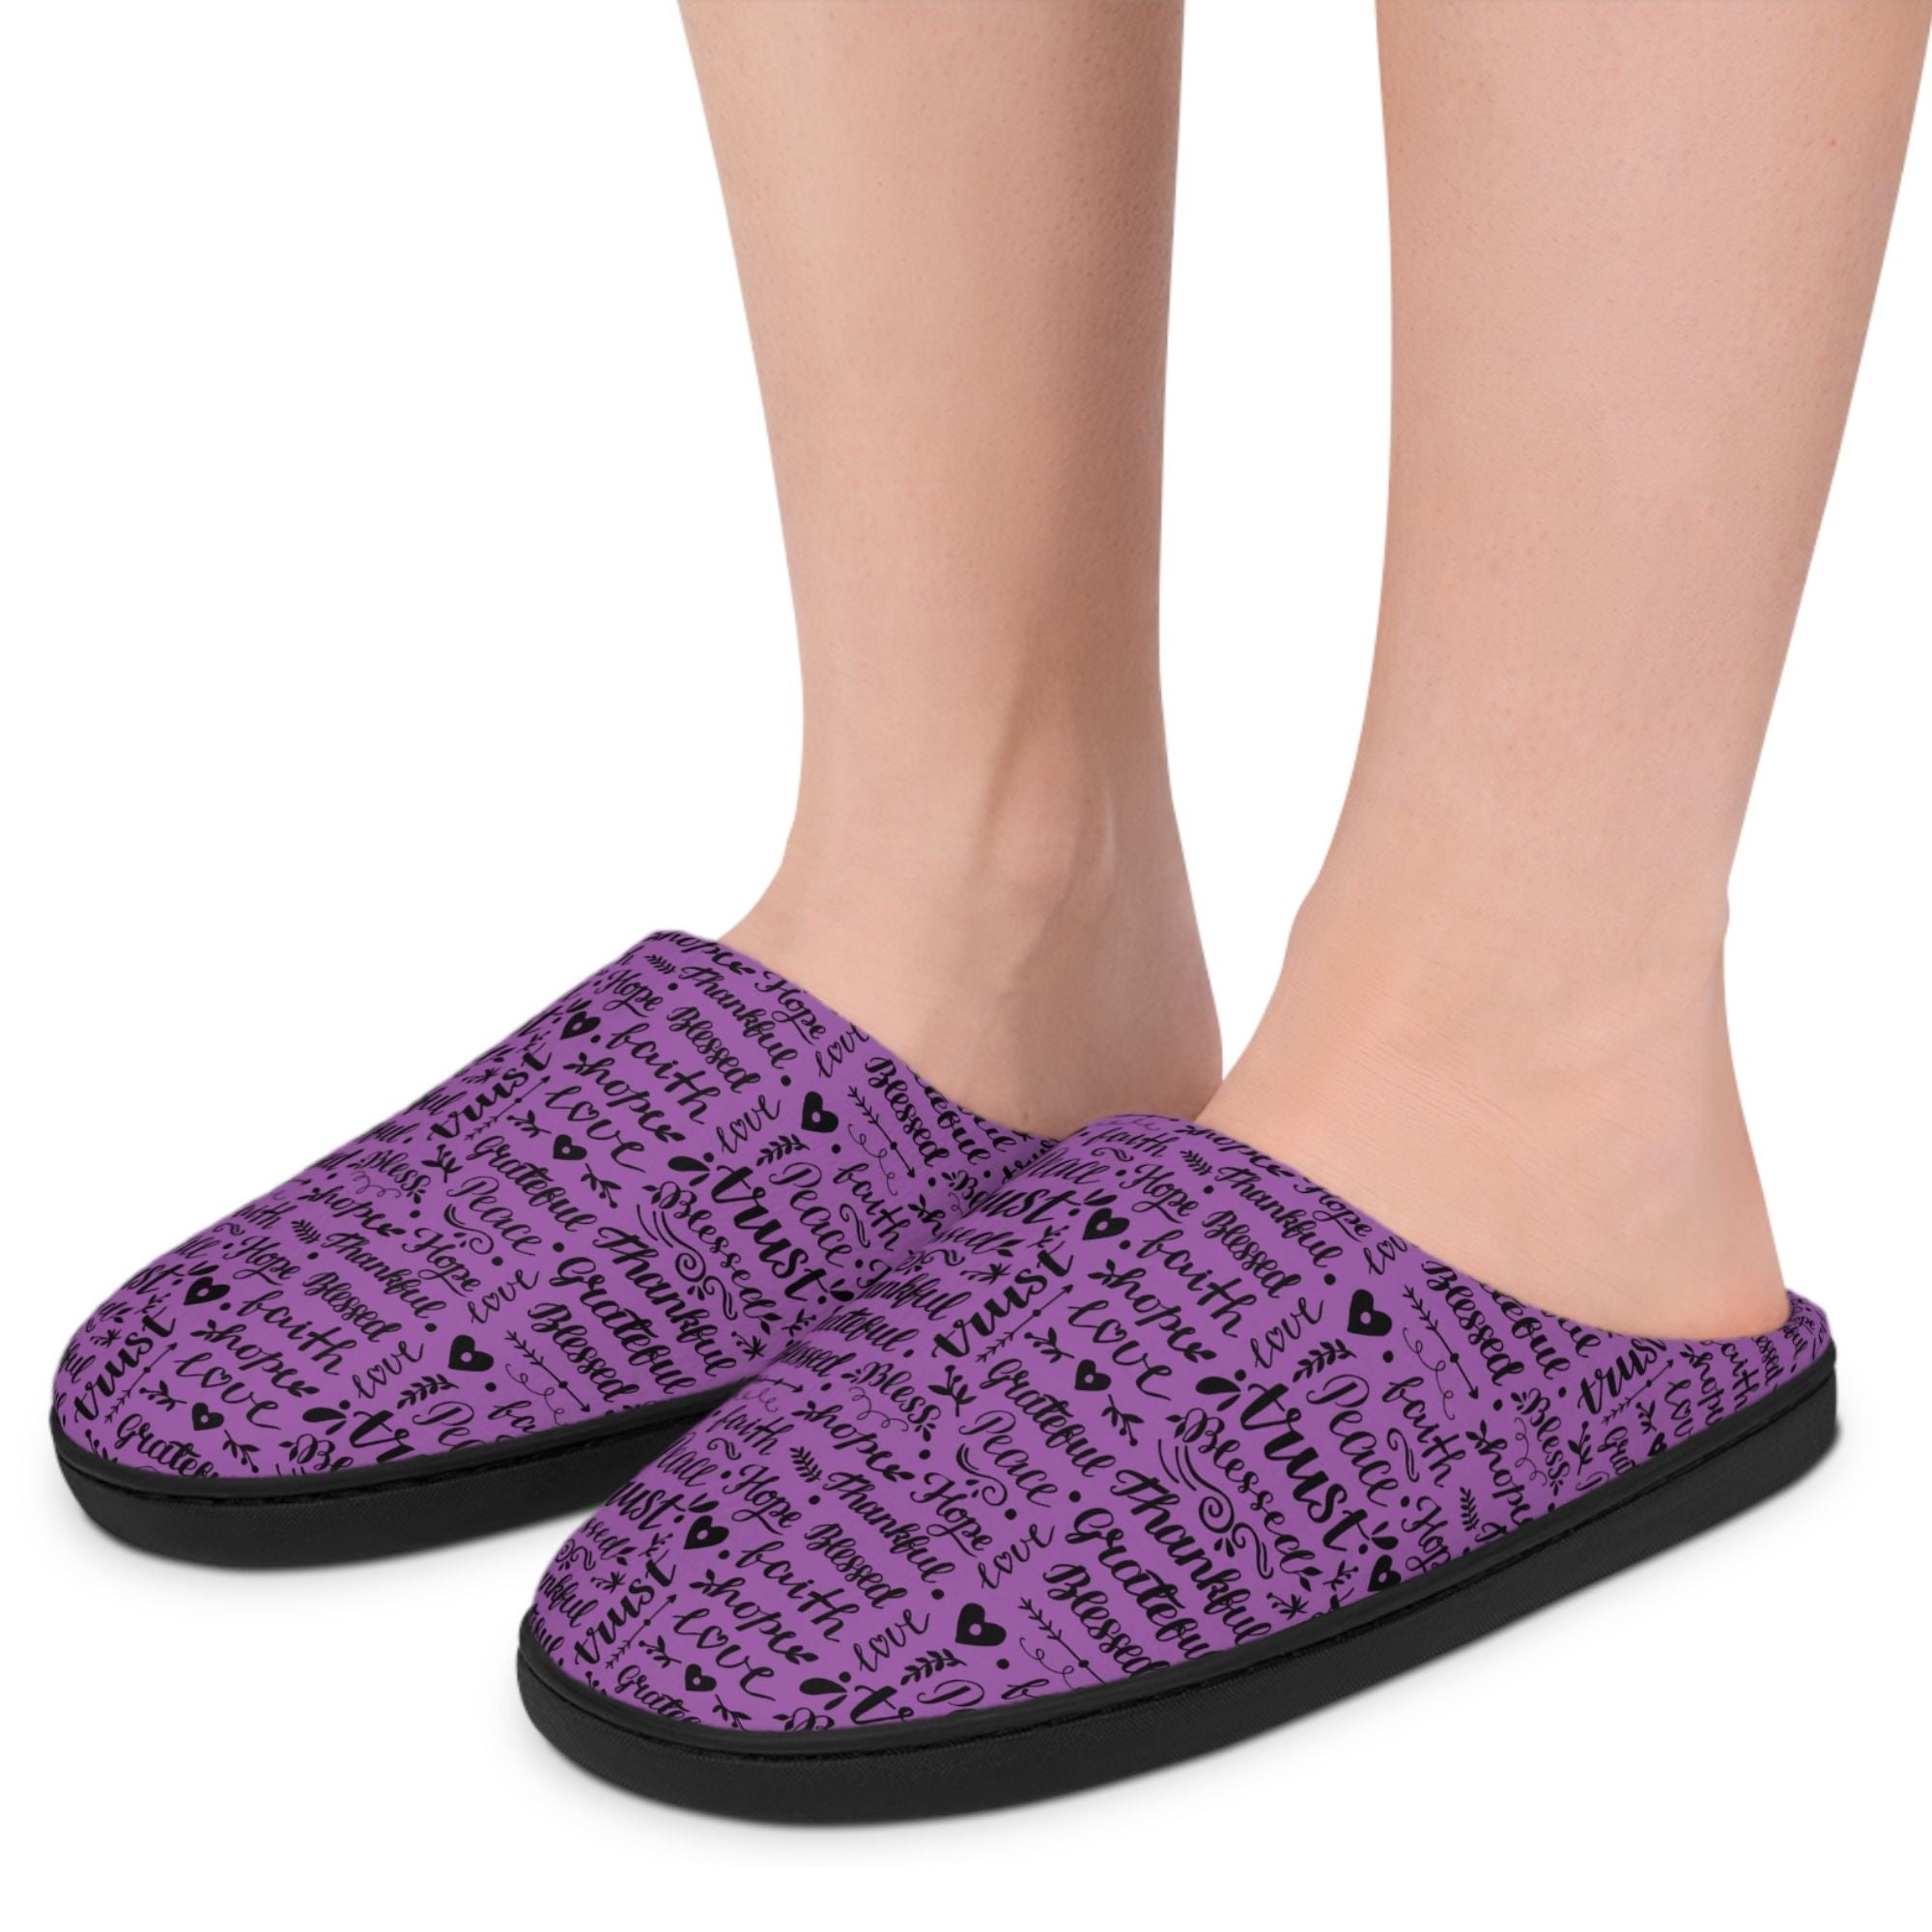 Thankful Grateful Blessed Women's Purple Indoor Slippers - Matching Pajama Set and Lounge / Pajama Pants Available Size: US 7 - 8 Color: Black sole Jesus Passion Apparel